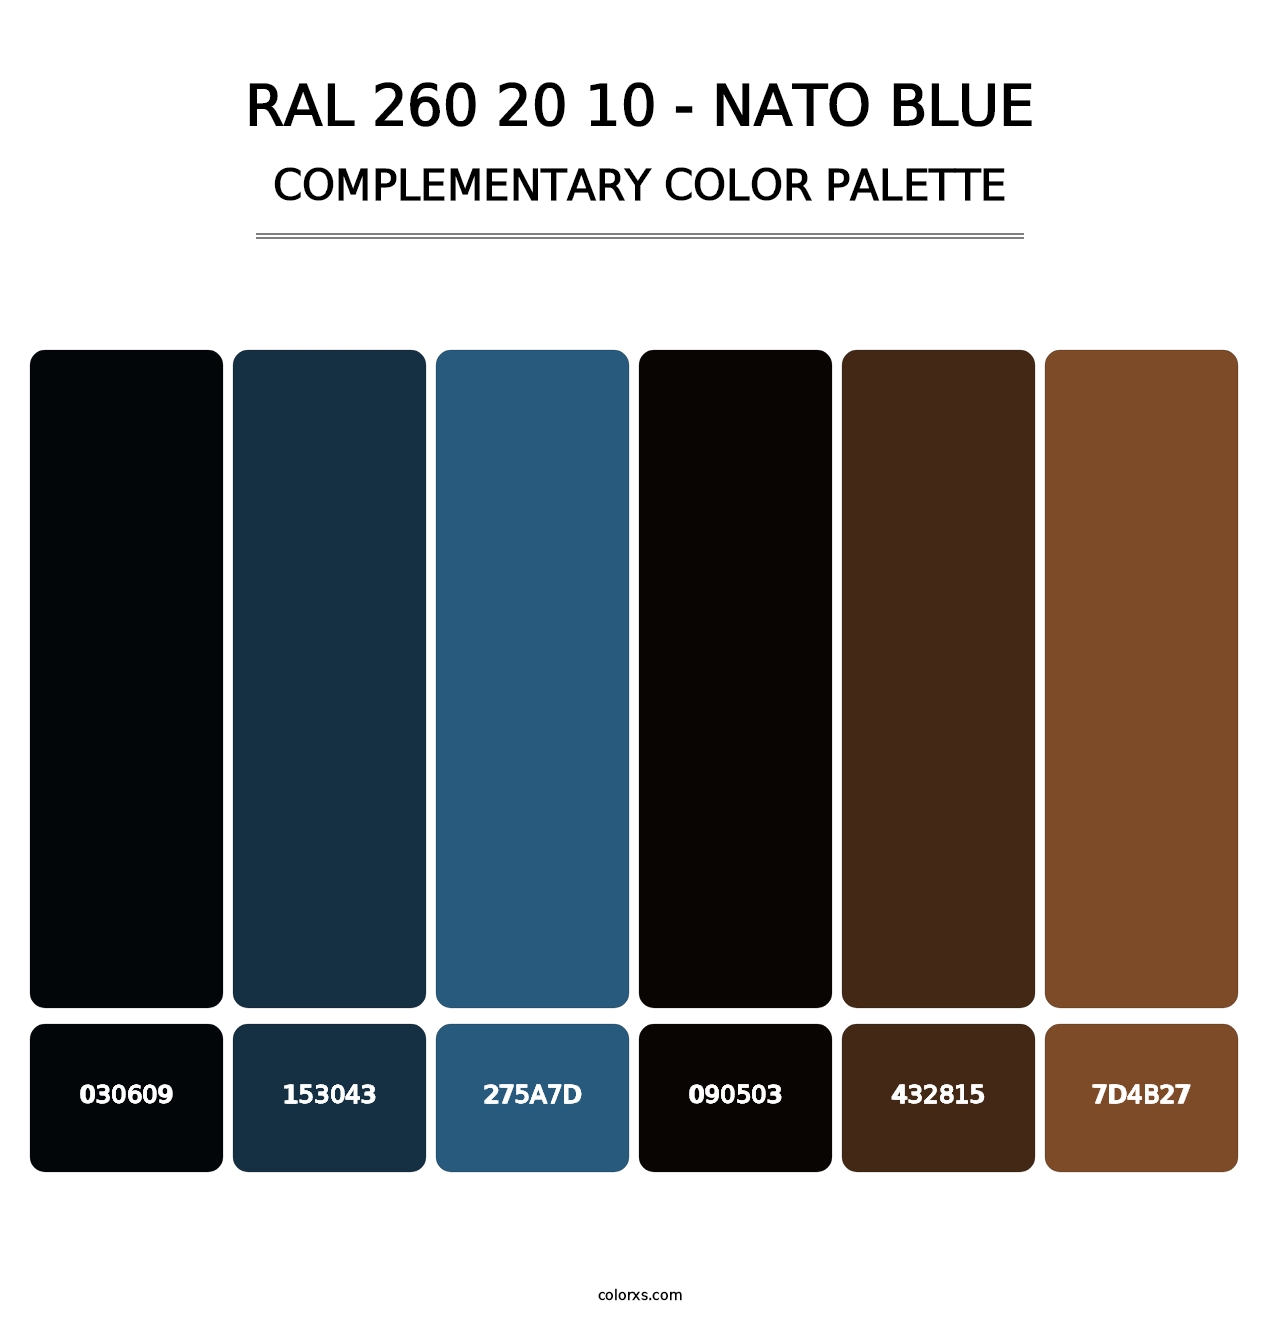 RAL 260 20 10 - Nato Blue - Complementary Color Palette